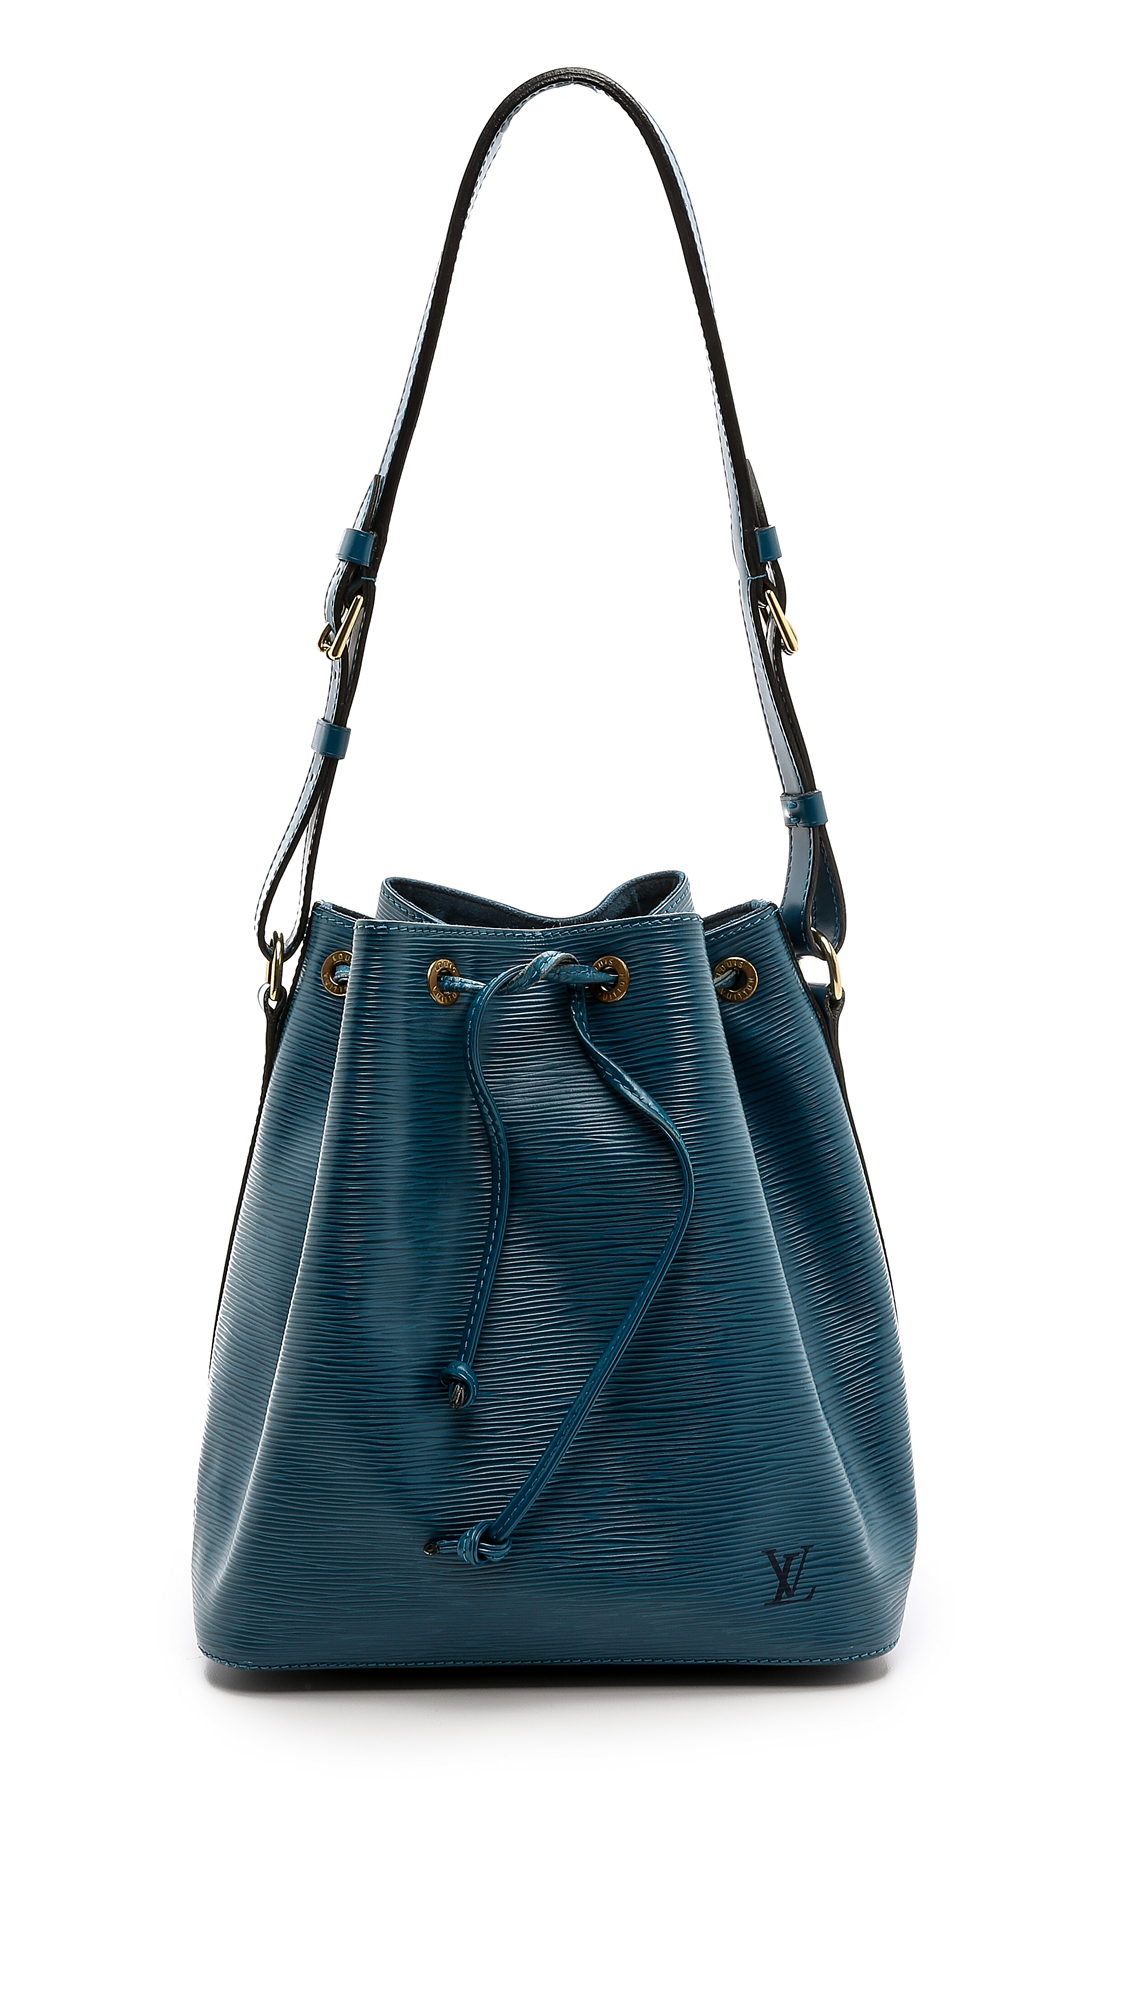 What goes around comes around Louis Vuitton Epi Noe Bucket Bag - Blue in Teal (Blue) | Lyst